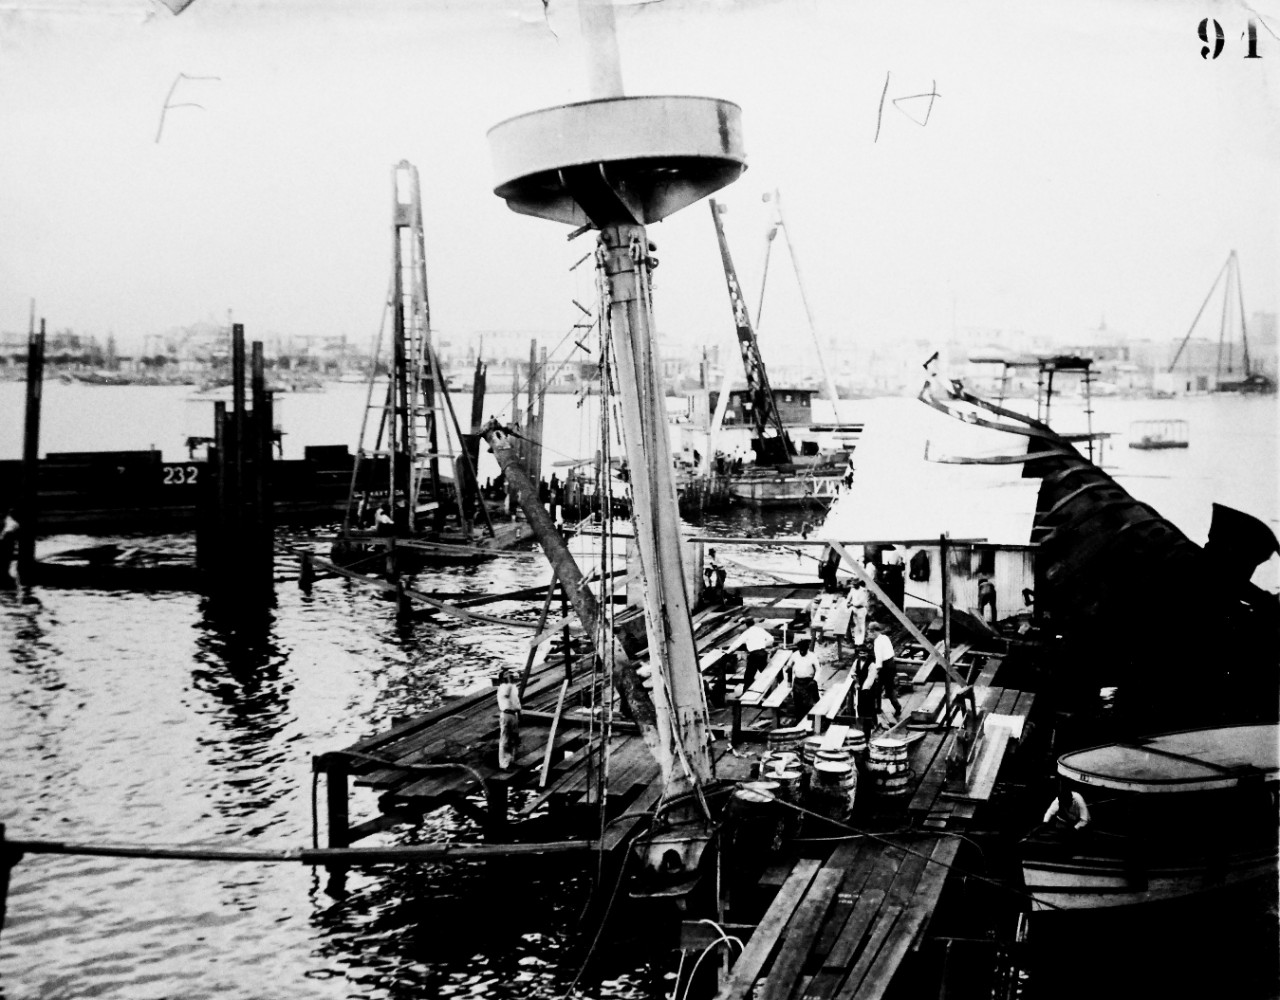 LC-Lot 8936-1:  USS Maine (1895-98), 1910.  Raising Maine’s wreck in Havana Harbor, Cuba, December 28, 1910.  Her mast is shown along with cylinders “F” and “H” as the cofferdam is being built.  Maine exploded on February 15, 1898, and was one of the causes for the United States to enter war with Spain, Spanish-American War, April-August 1898.  Transfer from the War Department, Washington.  Courtesy of the Library of Congress.    (2015/10/2).